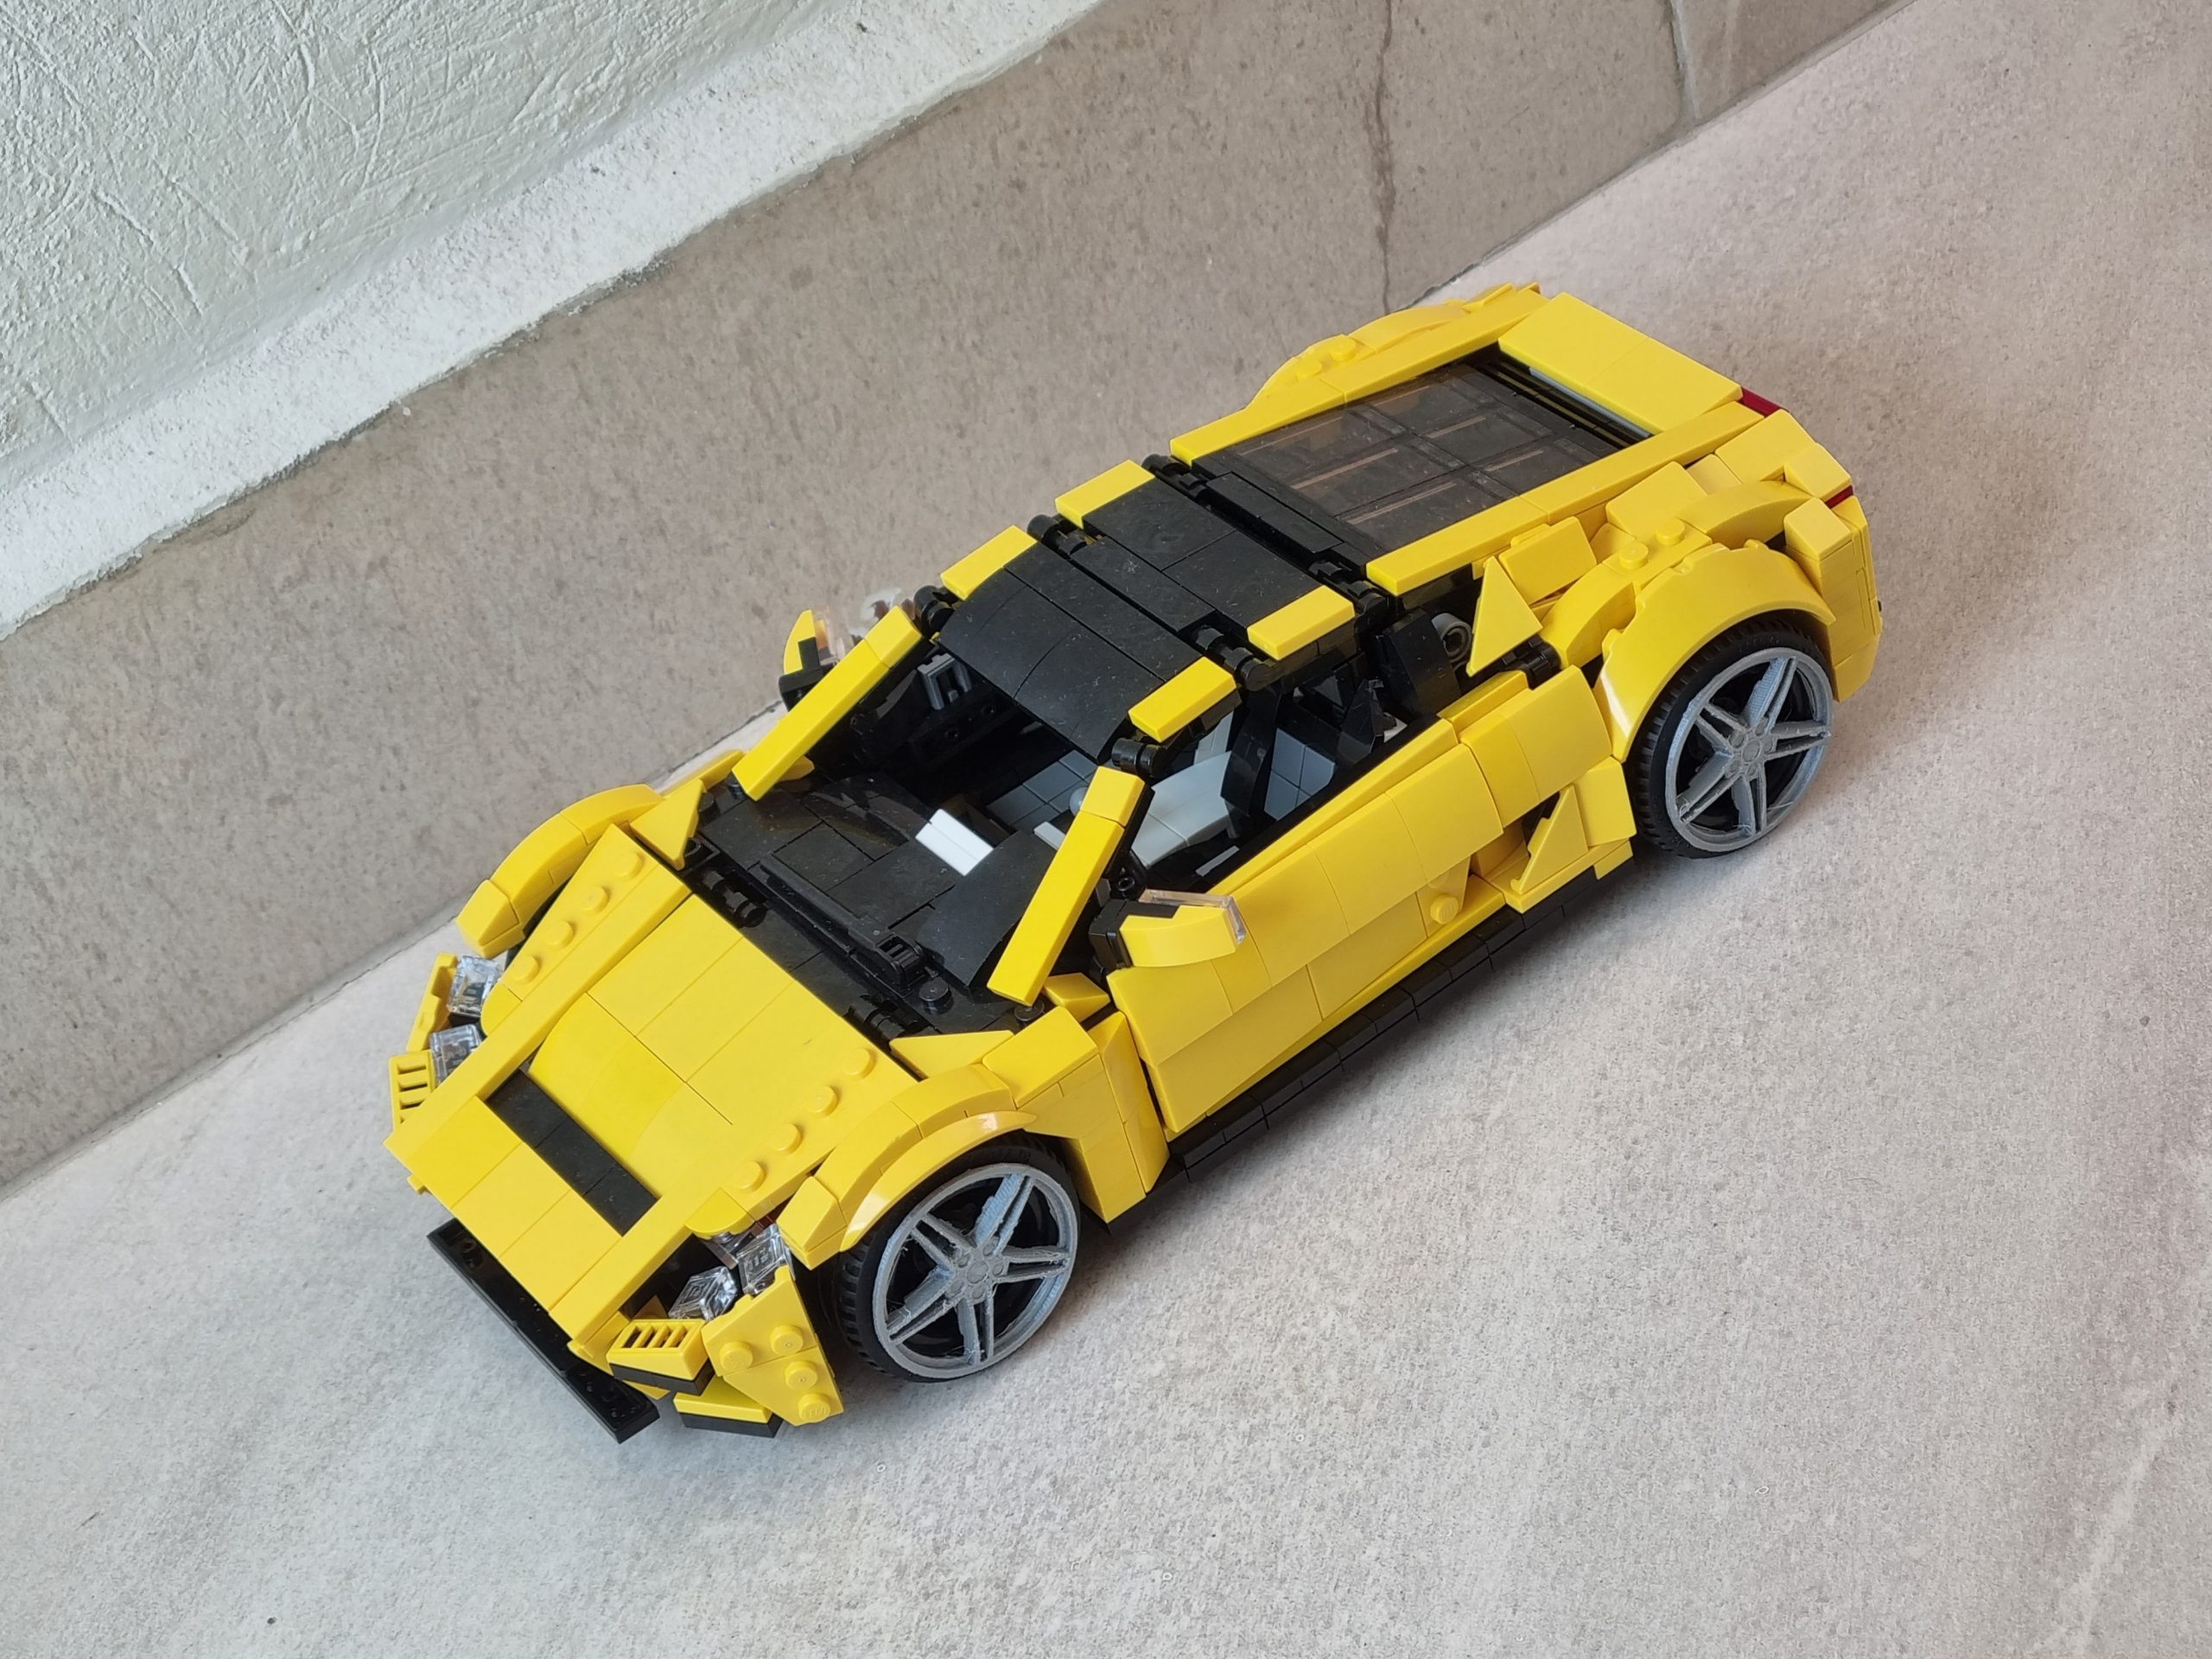 BMW I8 Concept Becomes Life-Sized LEGO Toy